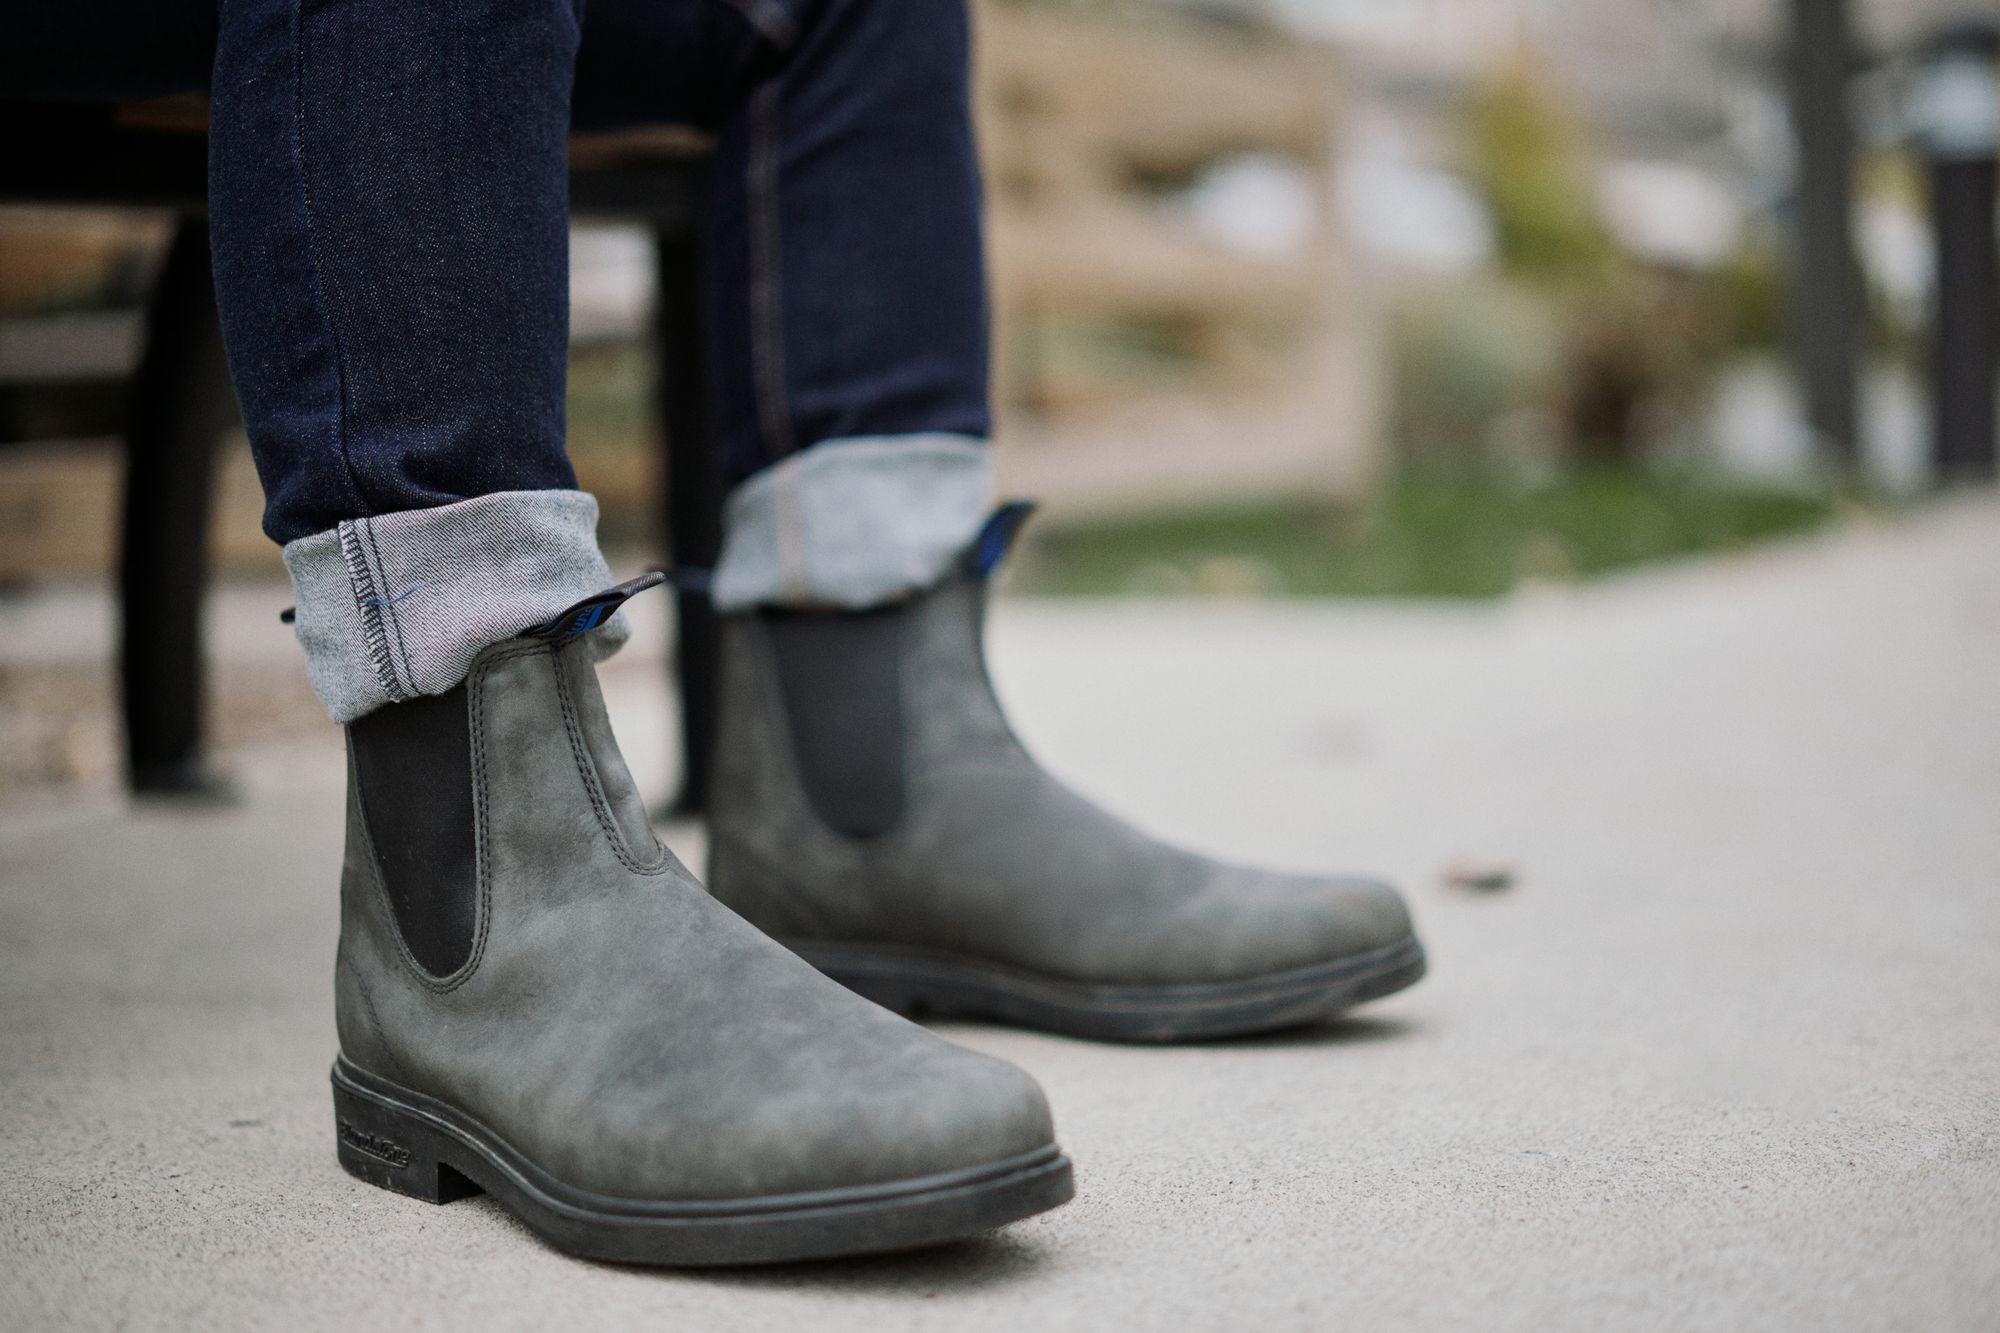 A Review Of The Blundstone 1308 Dress Boots